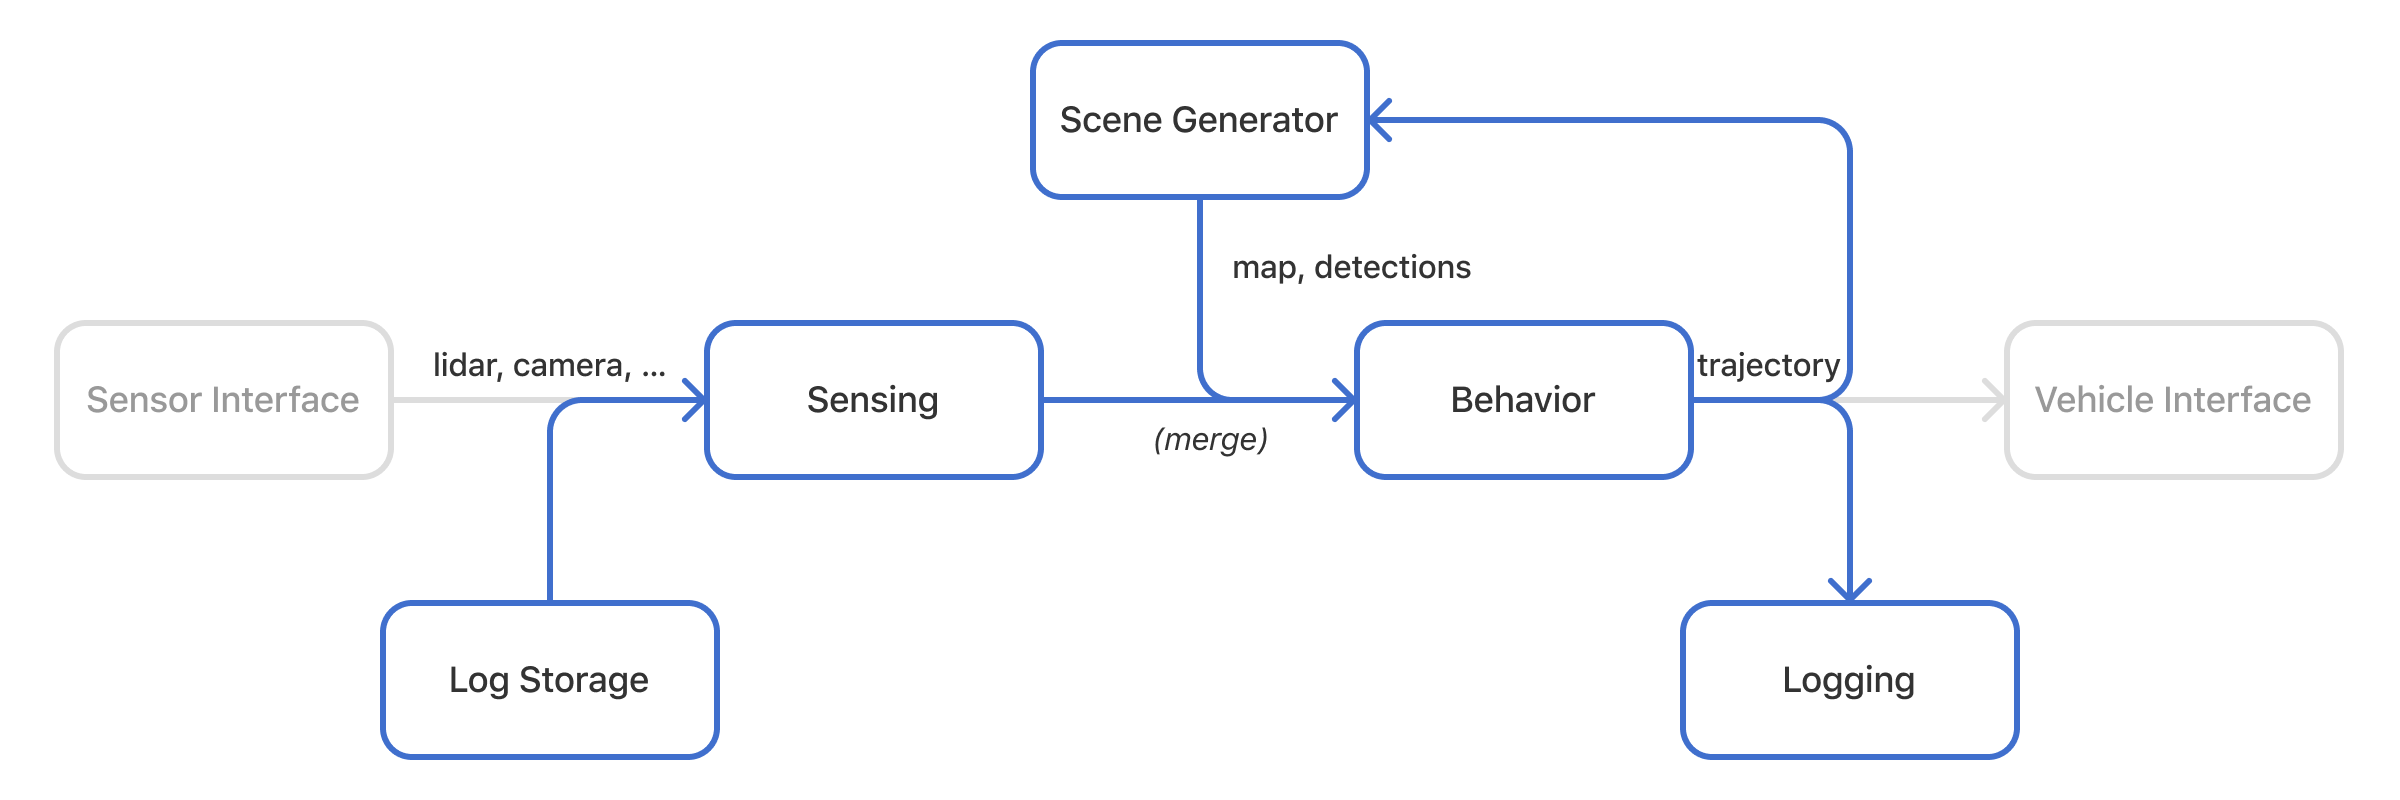 A modified block diagram with an arrow labeled lidar and camera pointing from Log Storage into Sensing. An arrow labeled map and detections pointing from Scene Generator to Behavior. The additional components Sensor Interface and Vehicle Interface are drawn in gray.